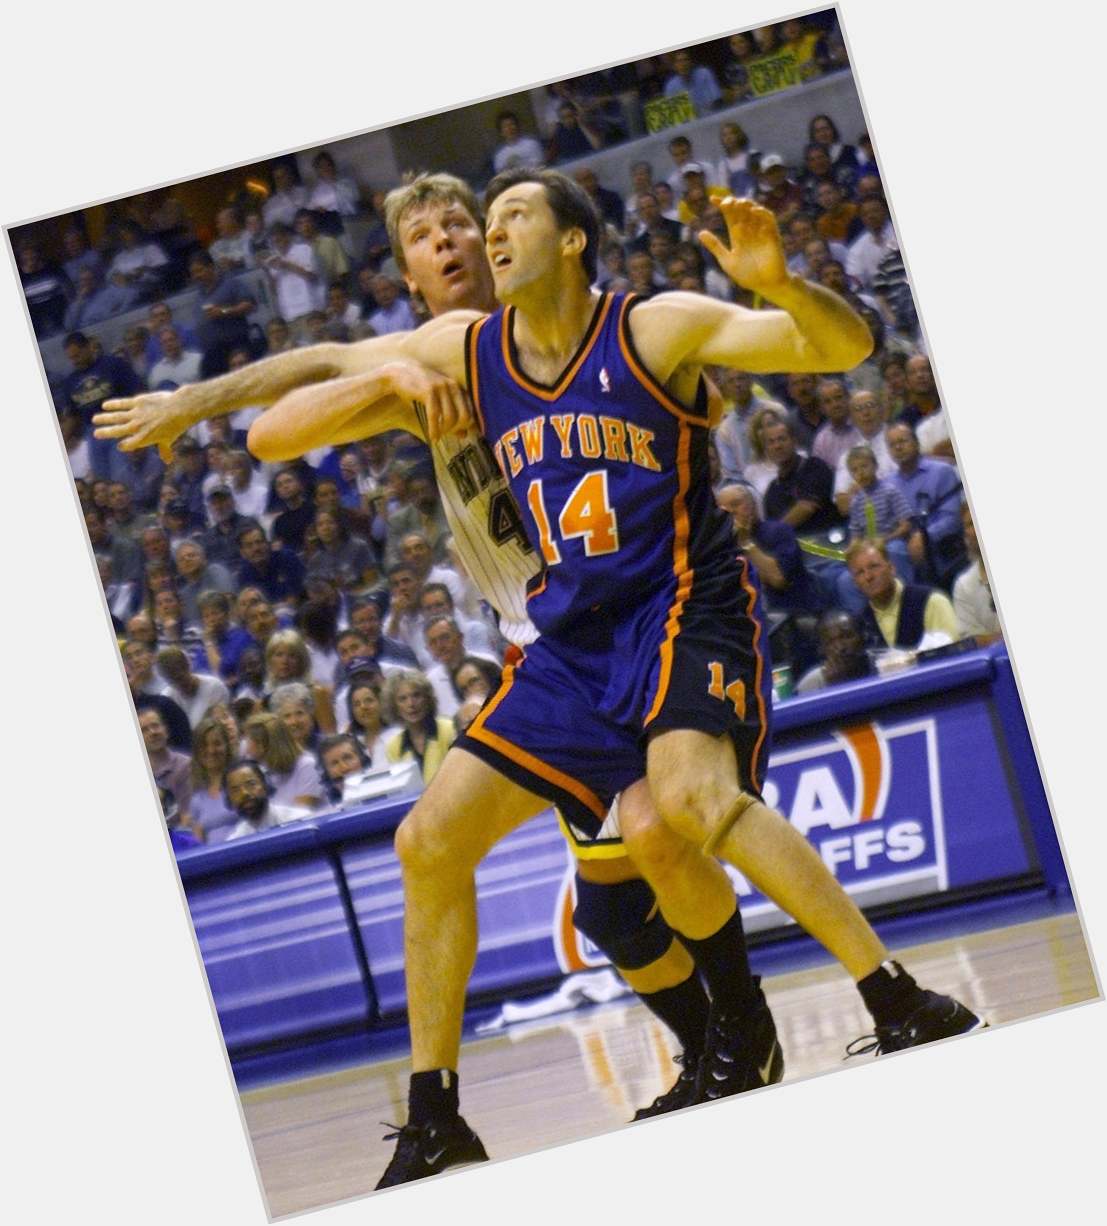 Http://fanpagepress.net/m/C/Chris Dudley Hairstyle 3